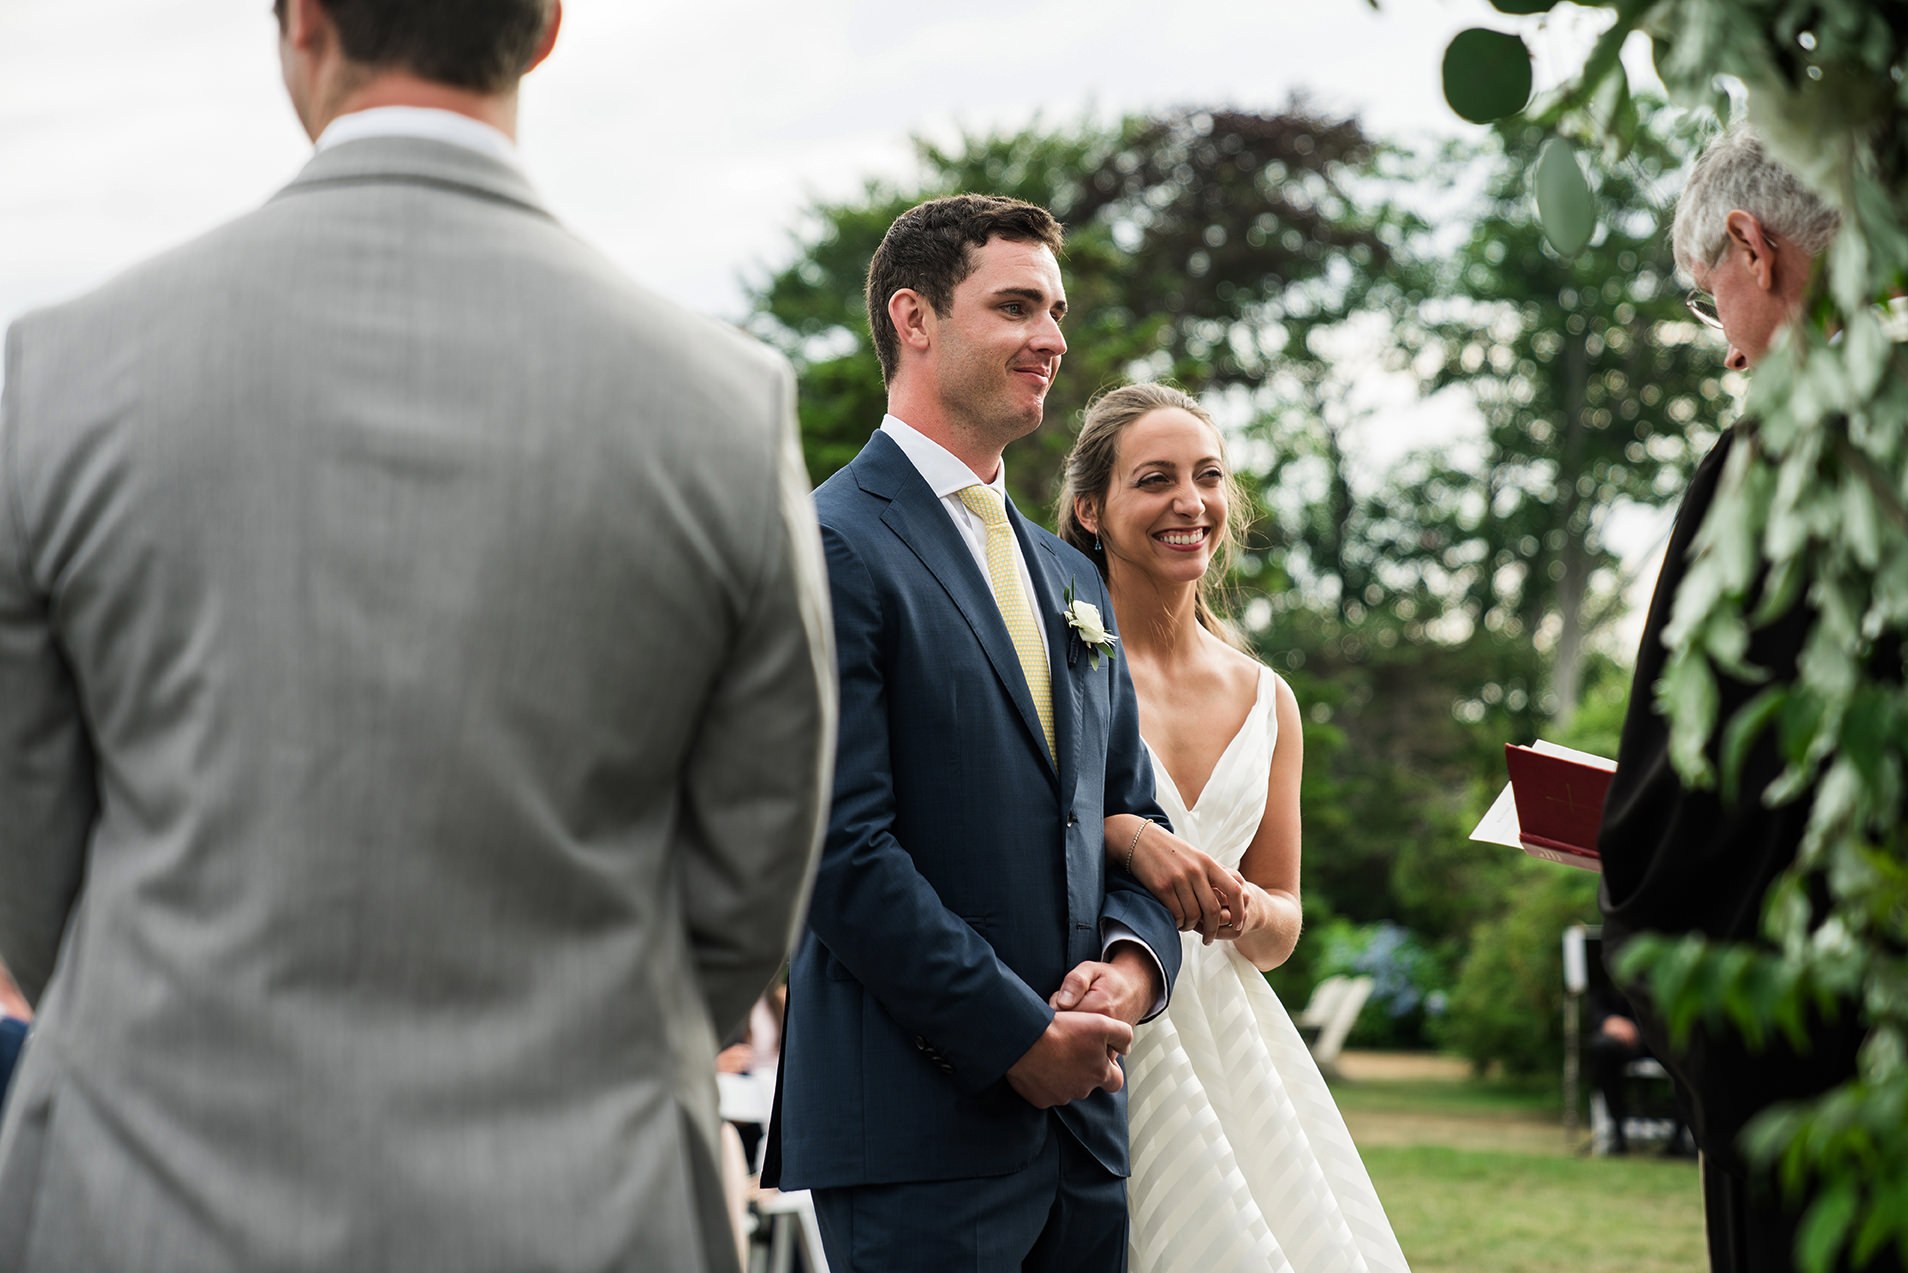 A best of Boston wedding photograph of a couple smiling and embracing during their outdoor wedding ceremony at Castle Hill Inn